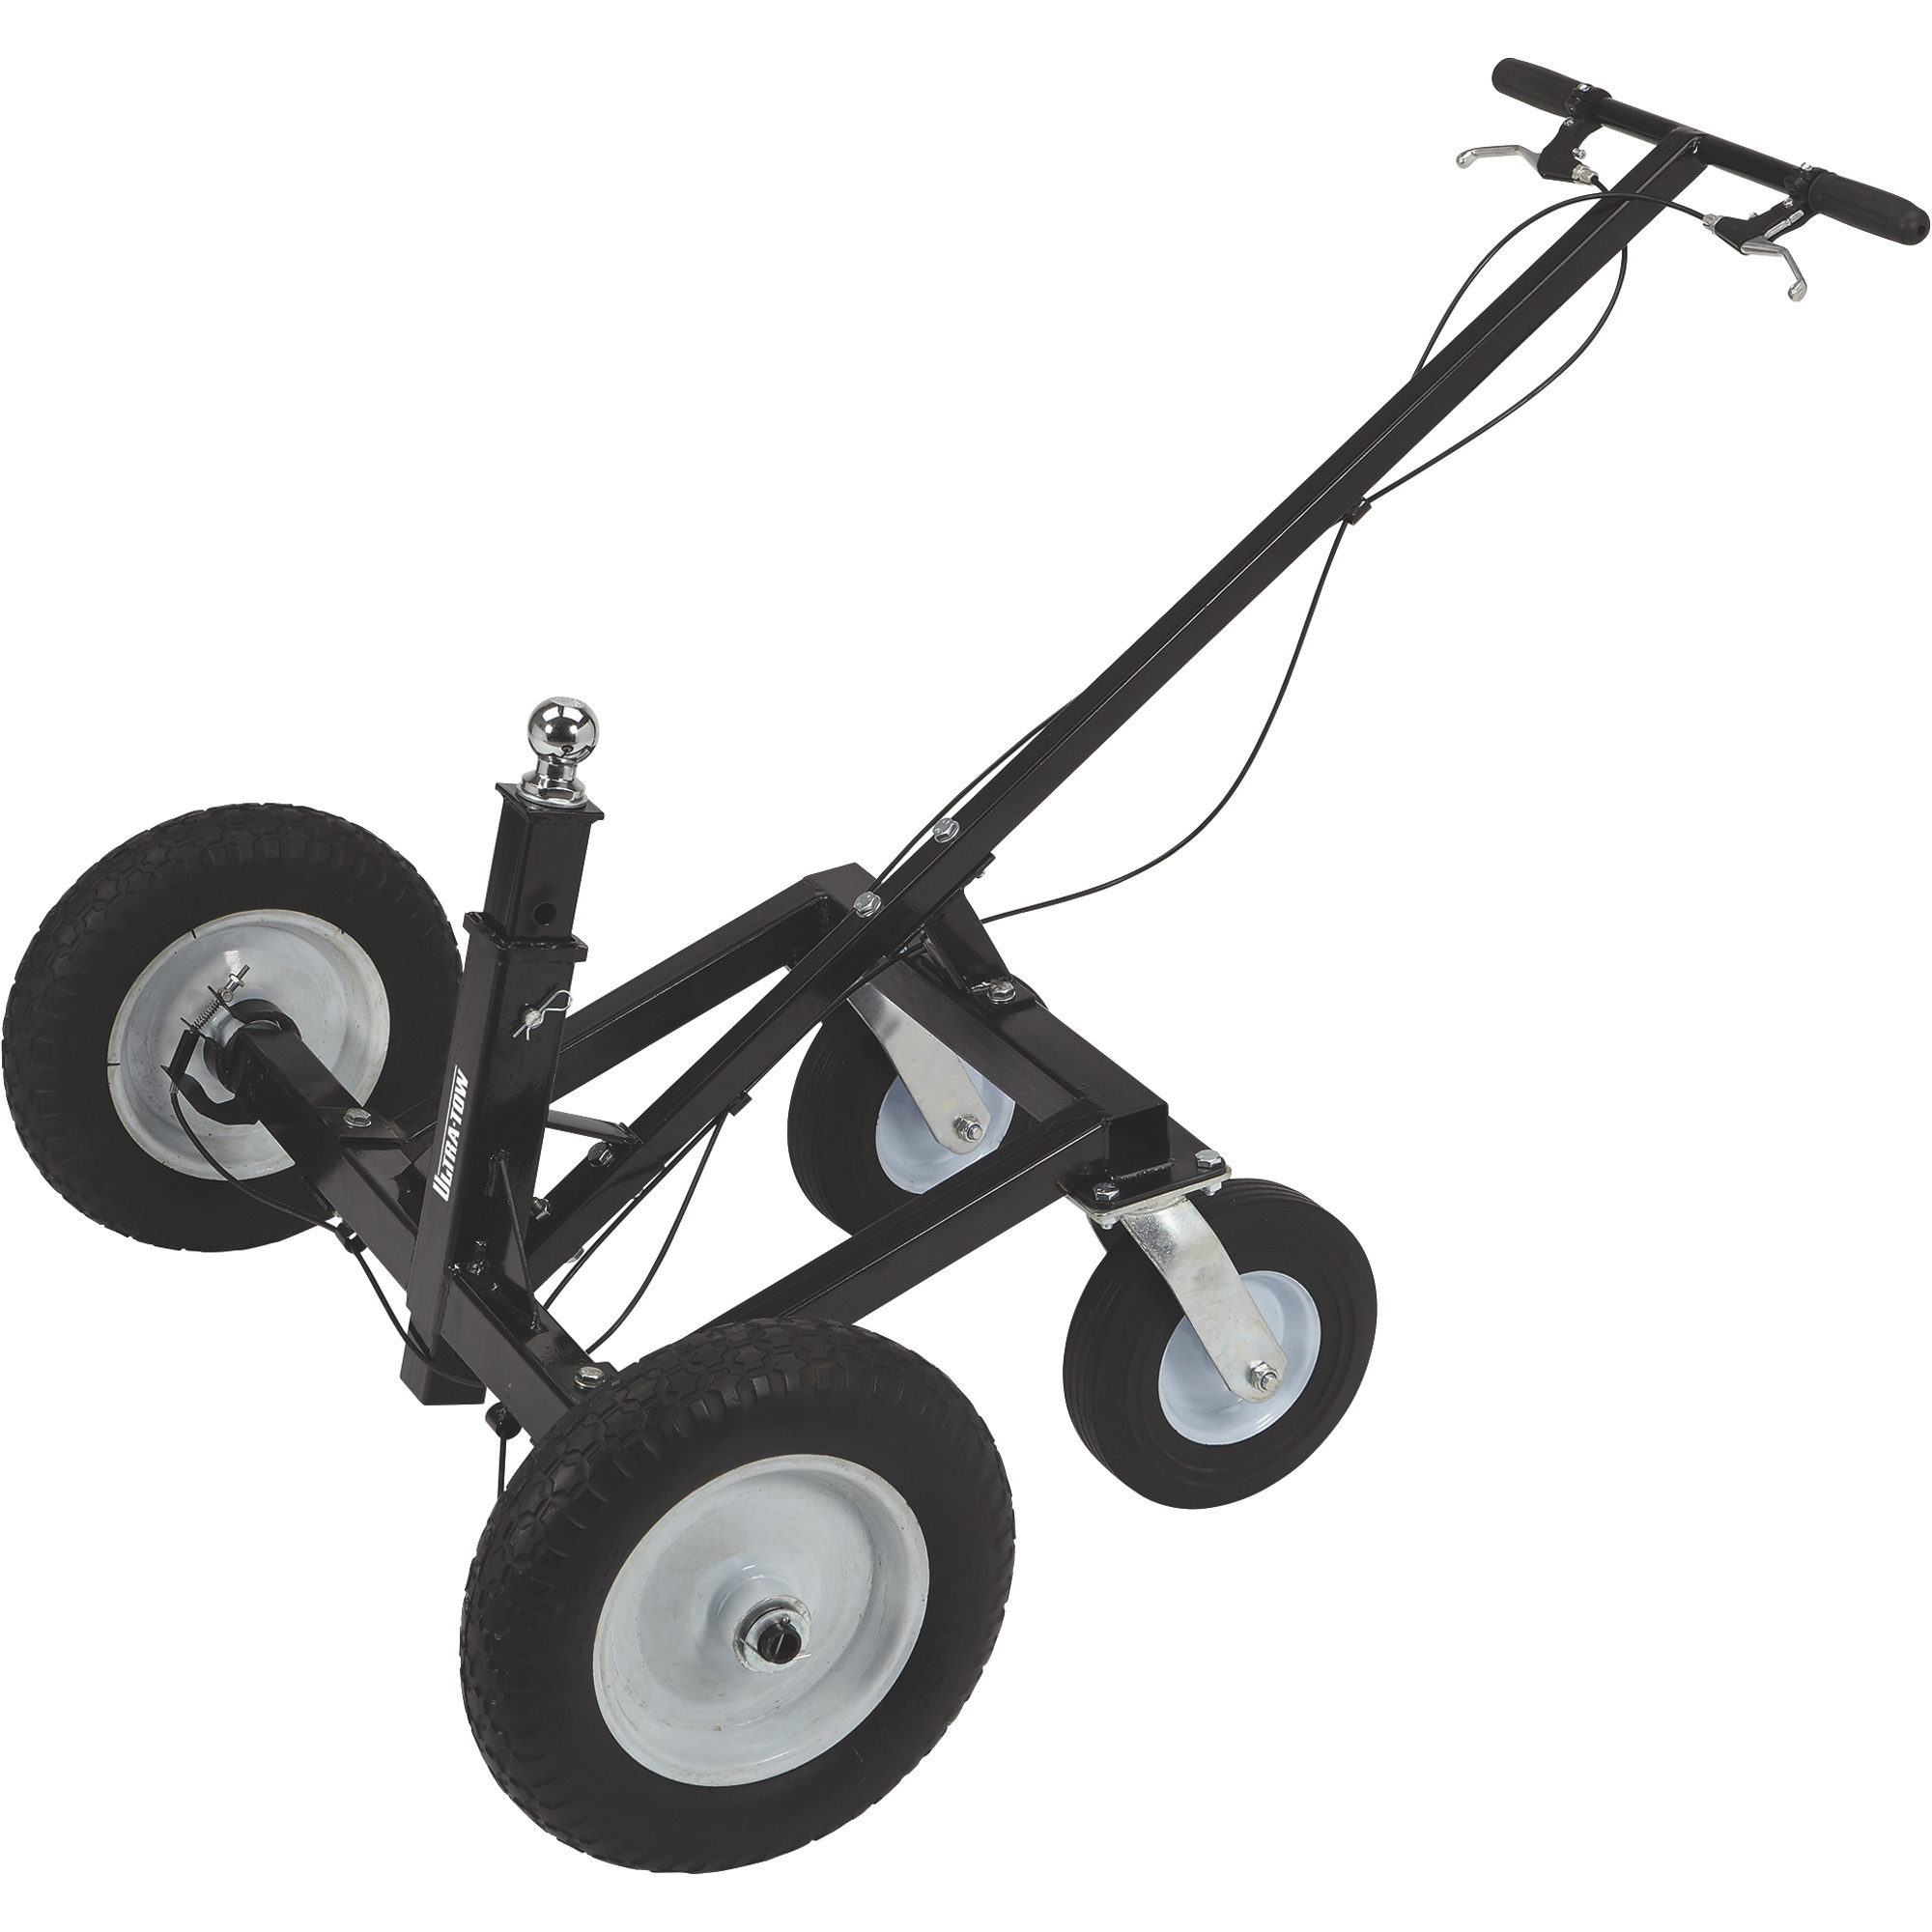 Ultra-Tow Heavy-Duty Adjustable Trailer Dolly with Brake â 1200-Lb. Capacity